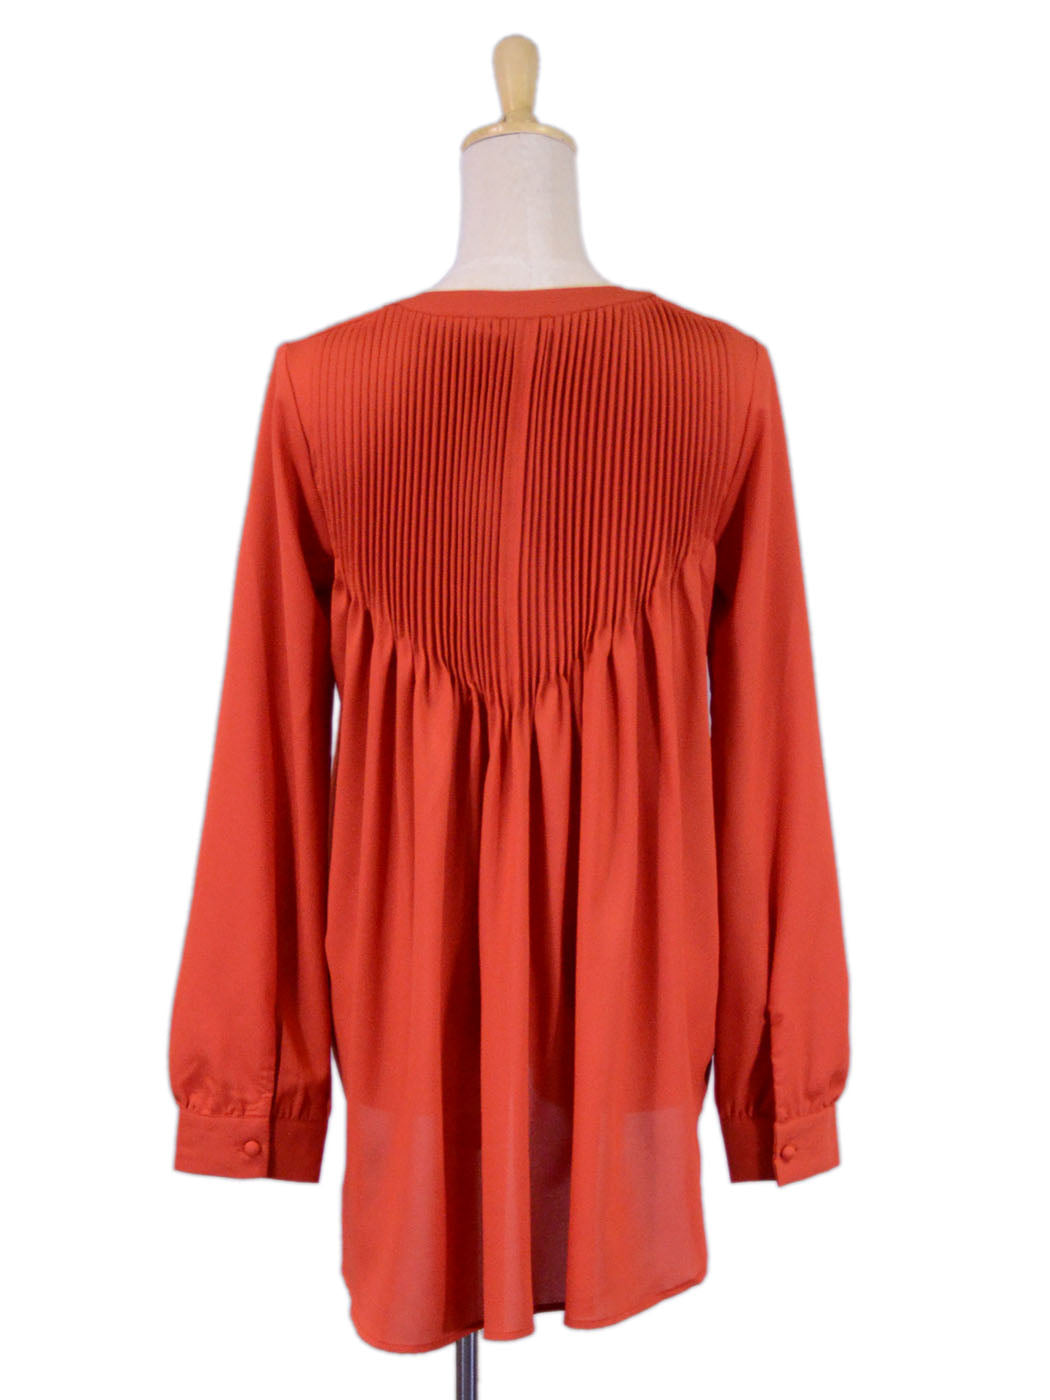 Naked Zebra Band Collar Front Button Up Long Sleeved High Low Woven Blouse - ALILANG.COM